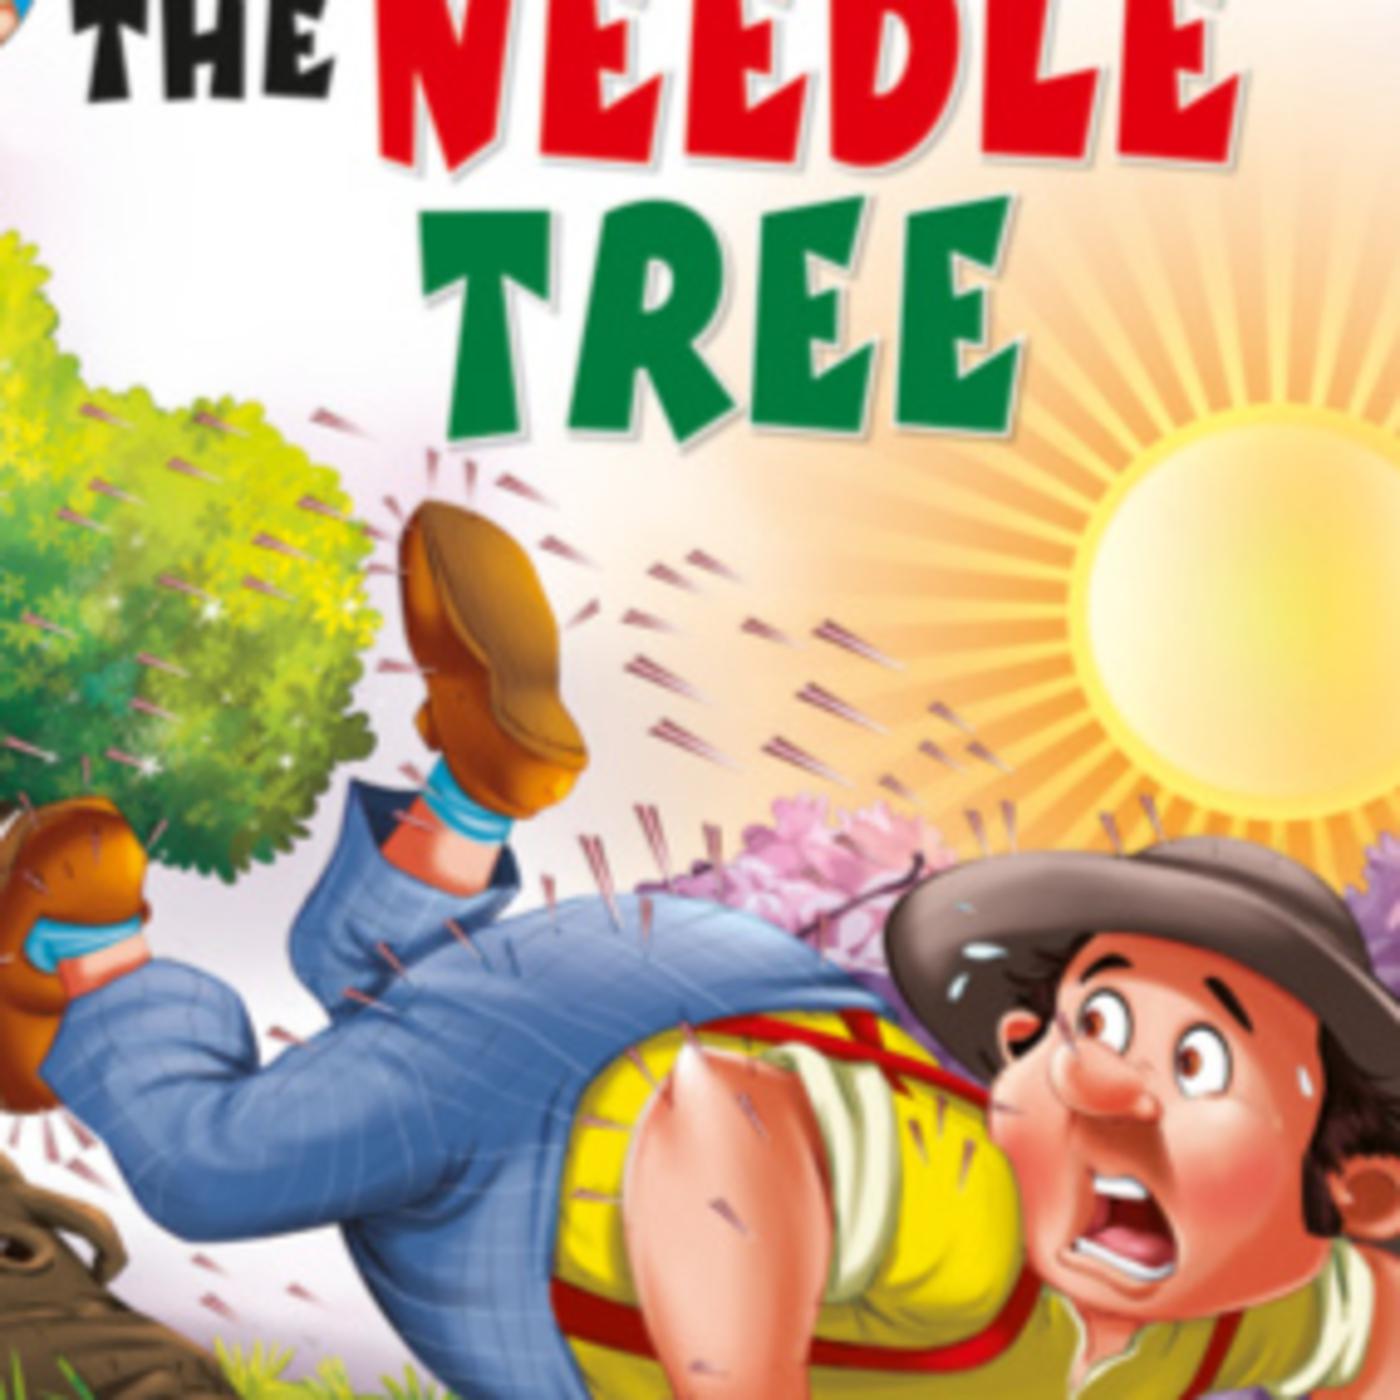 The Story of the Needle Tree: